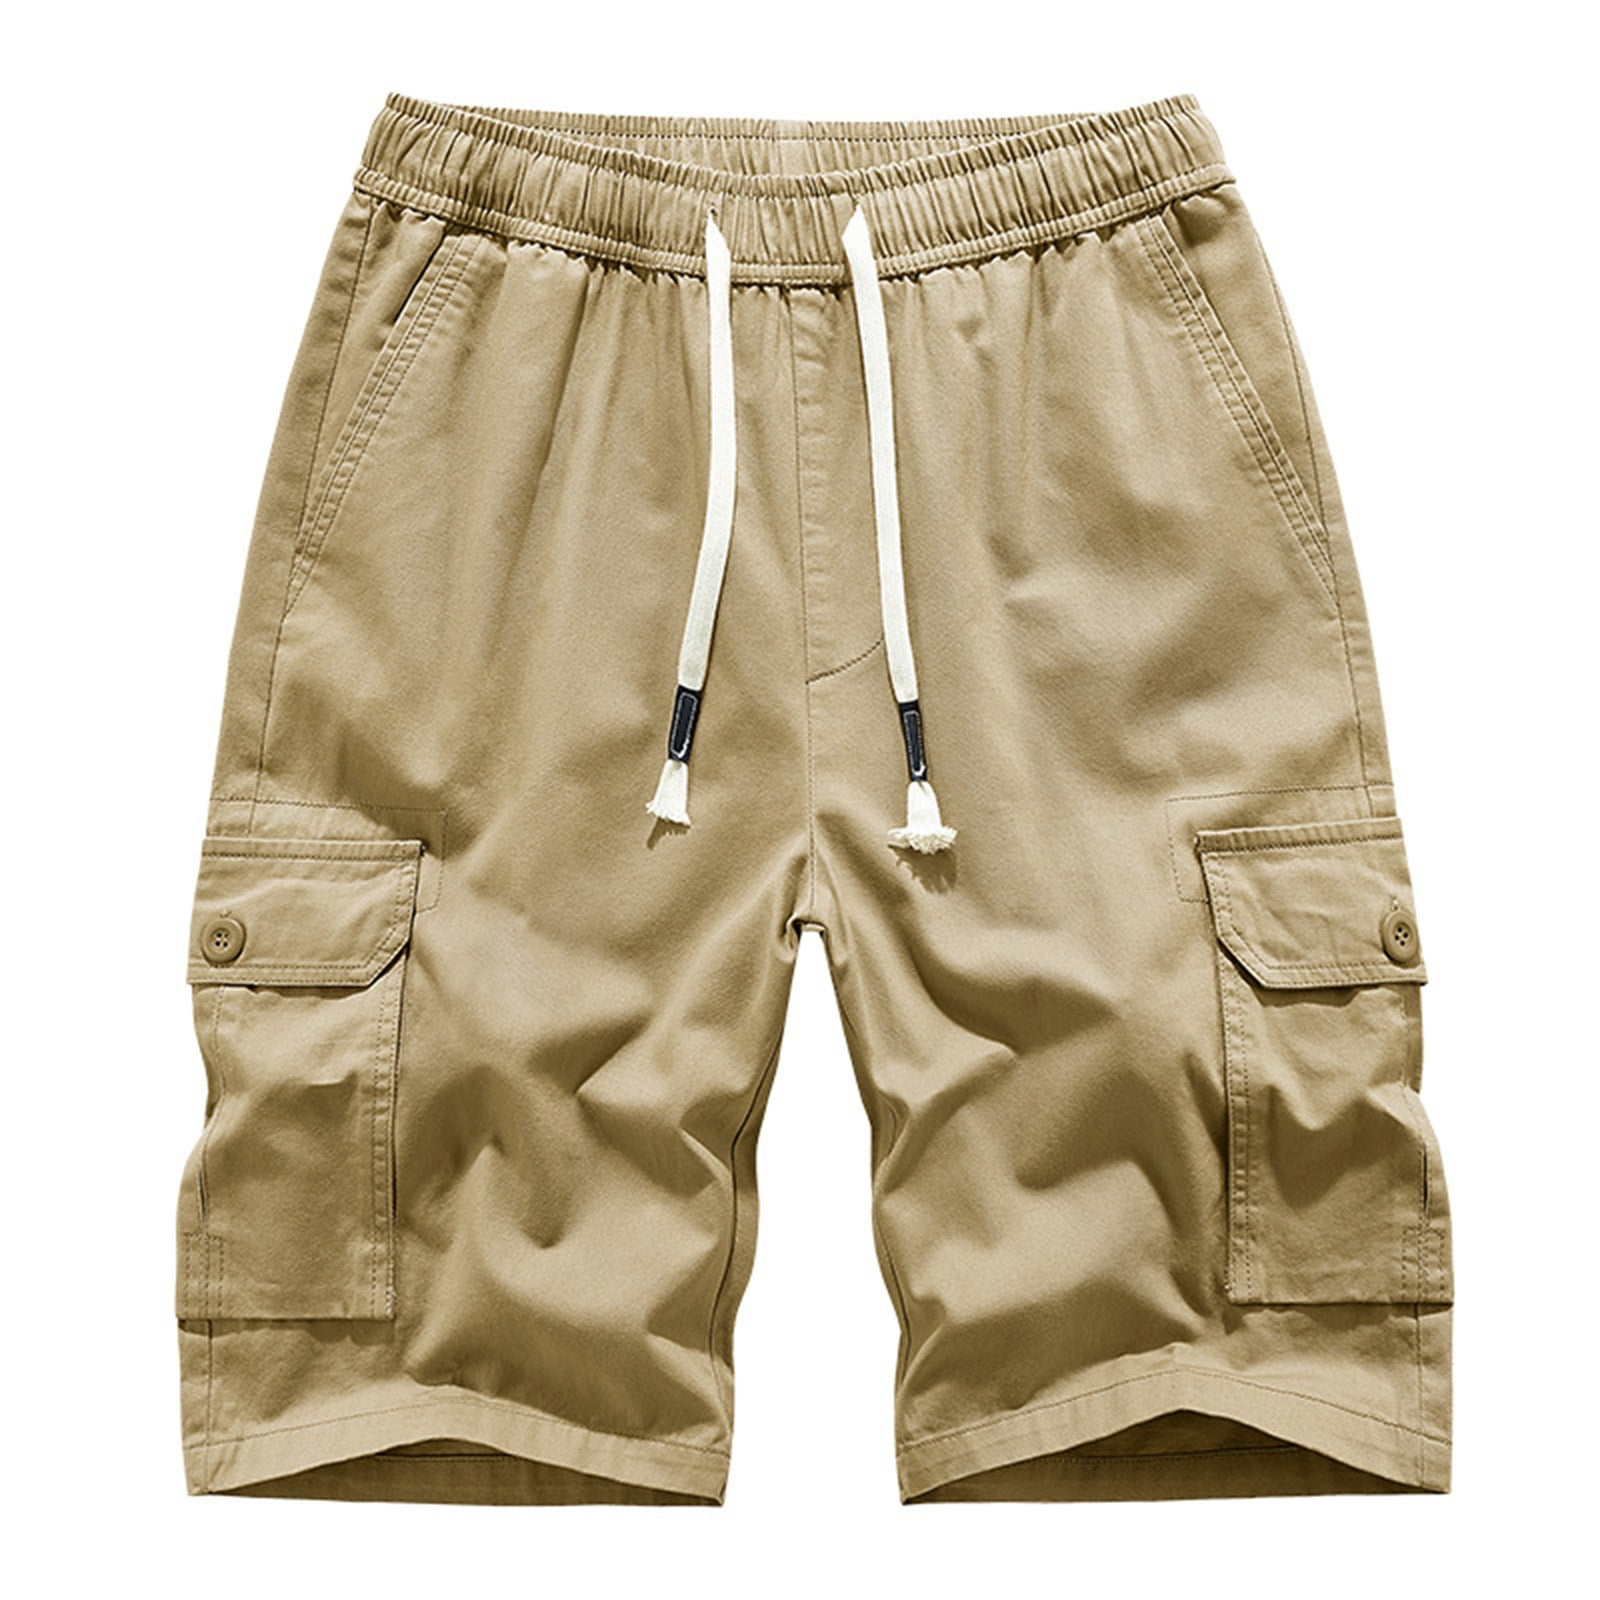 Men's Cargo Shorts Relaxed Fit Lightweight Short Pants Multi Pocket Casual  Outdoor Twill Cargo Short with 8 Pockets